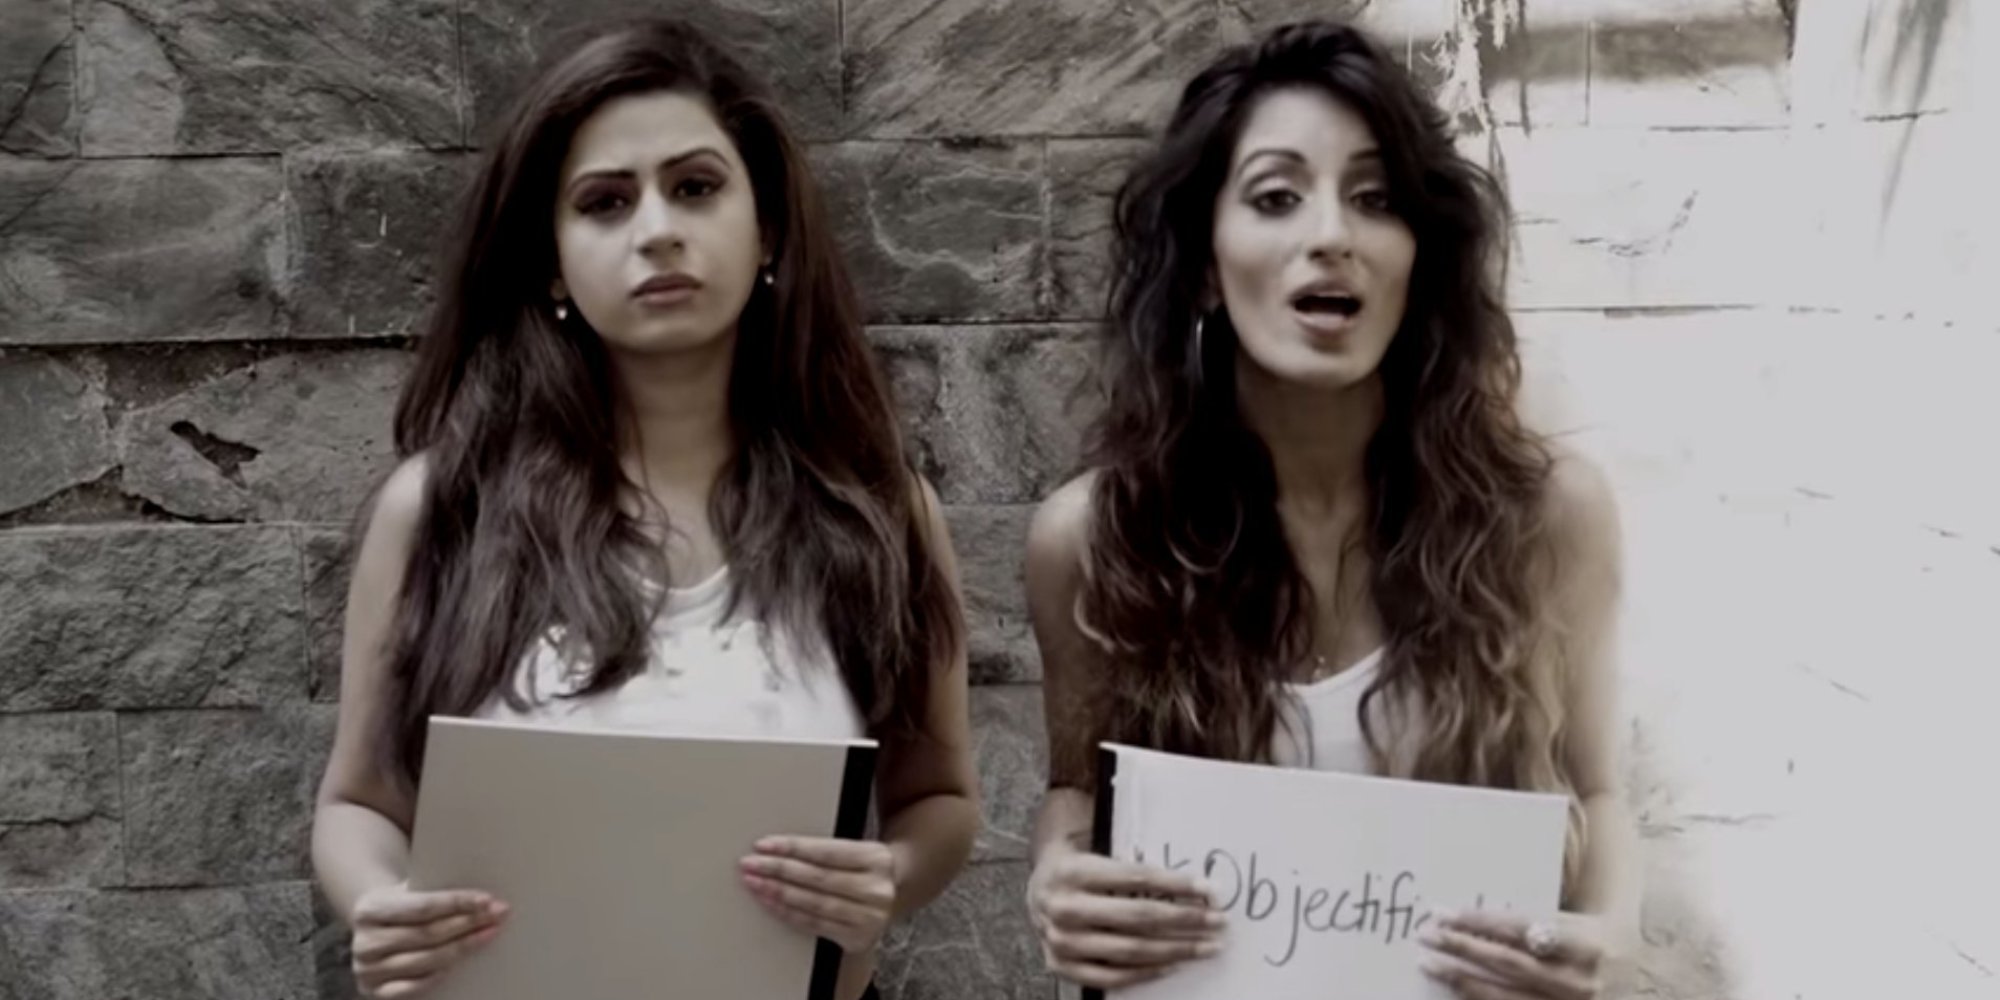 Indian Women Take Down Their Country's Rape Culture In 3-Minute Rap